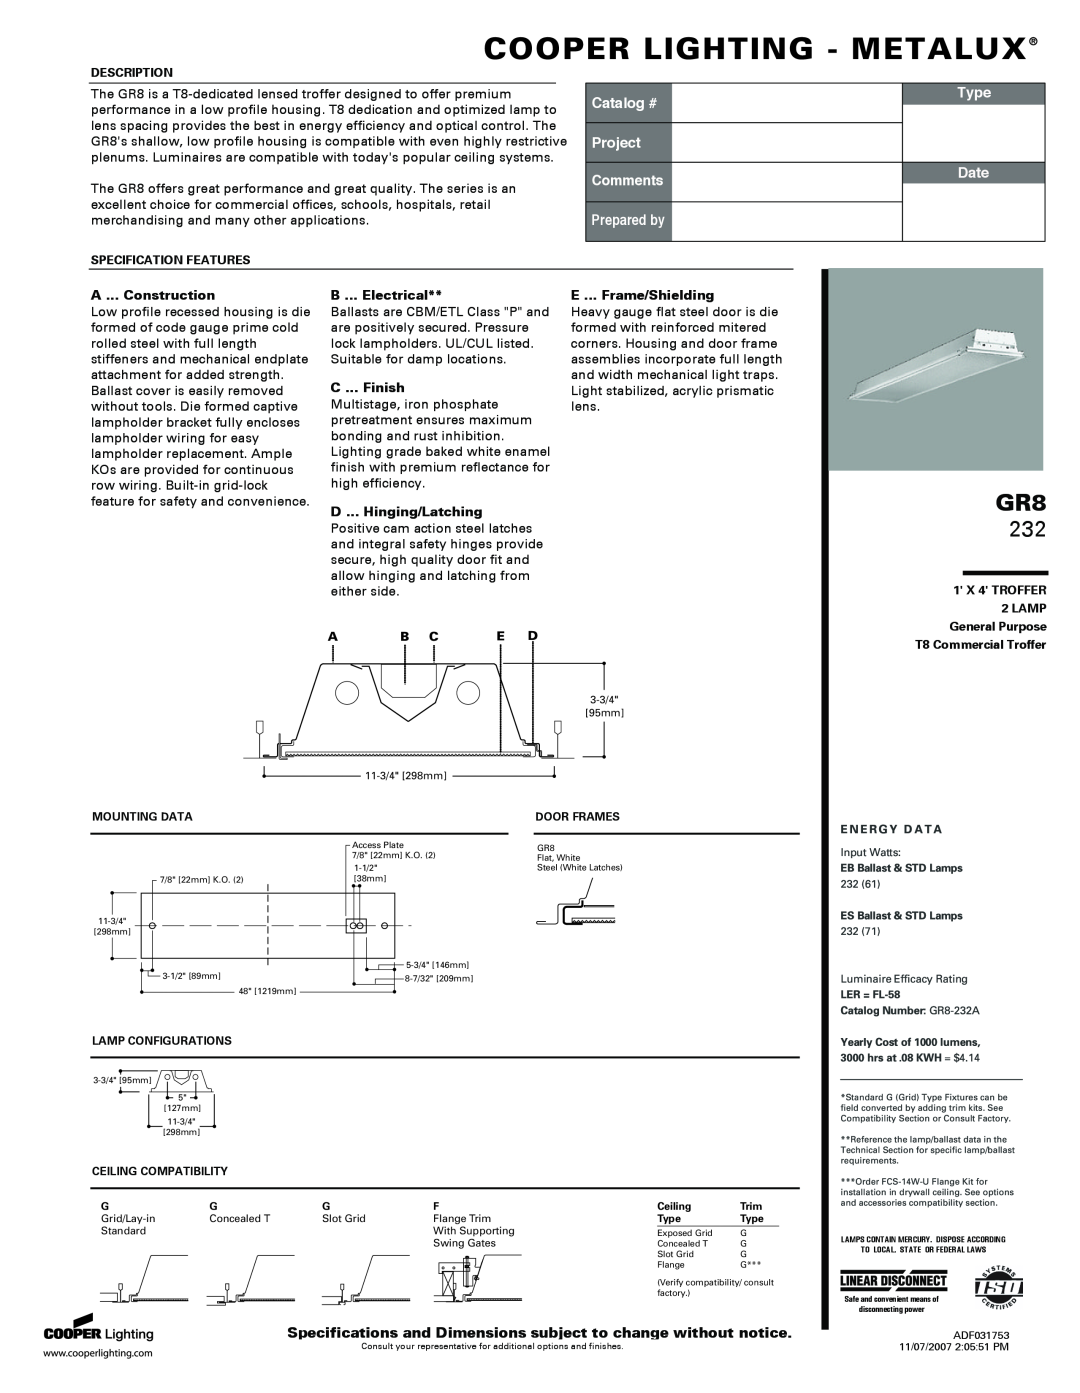 Cooper Lighting CWR-800 specifications Cooper Lighting - Metalux, Catalog #, Project Comments, Prepared by, Type, Date 